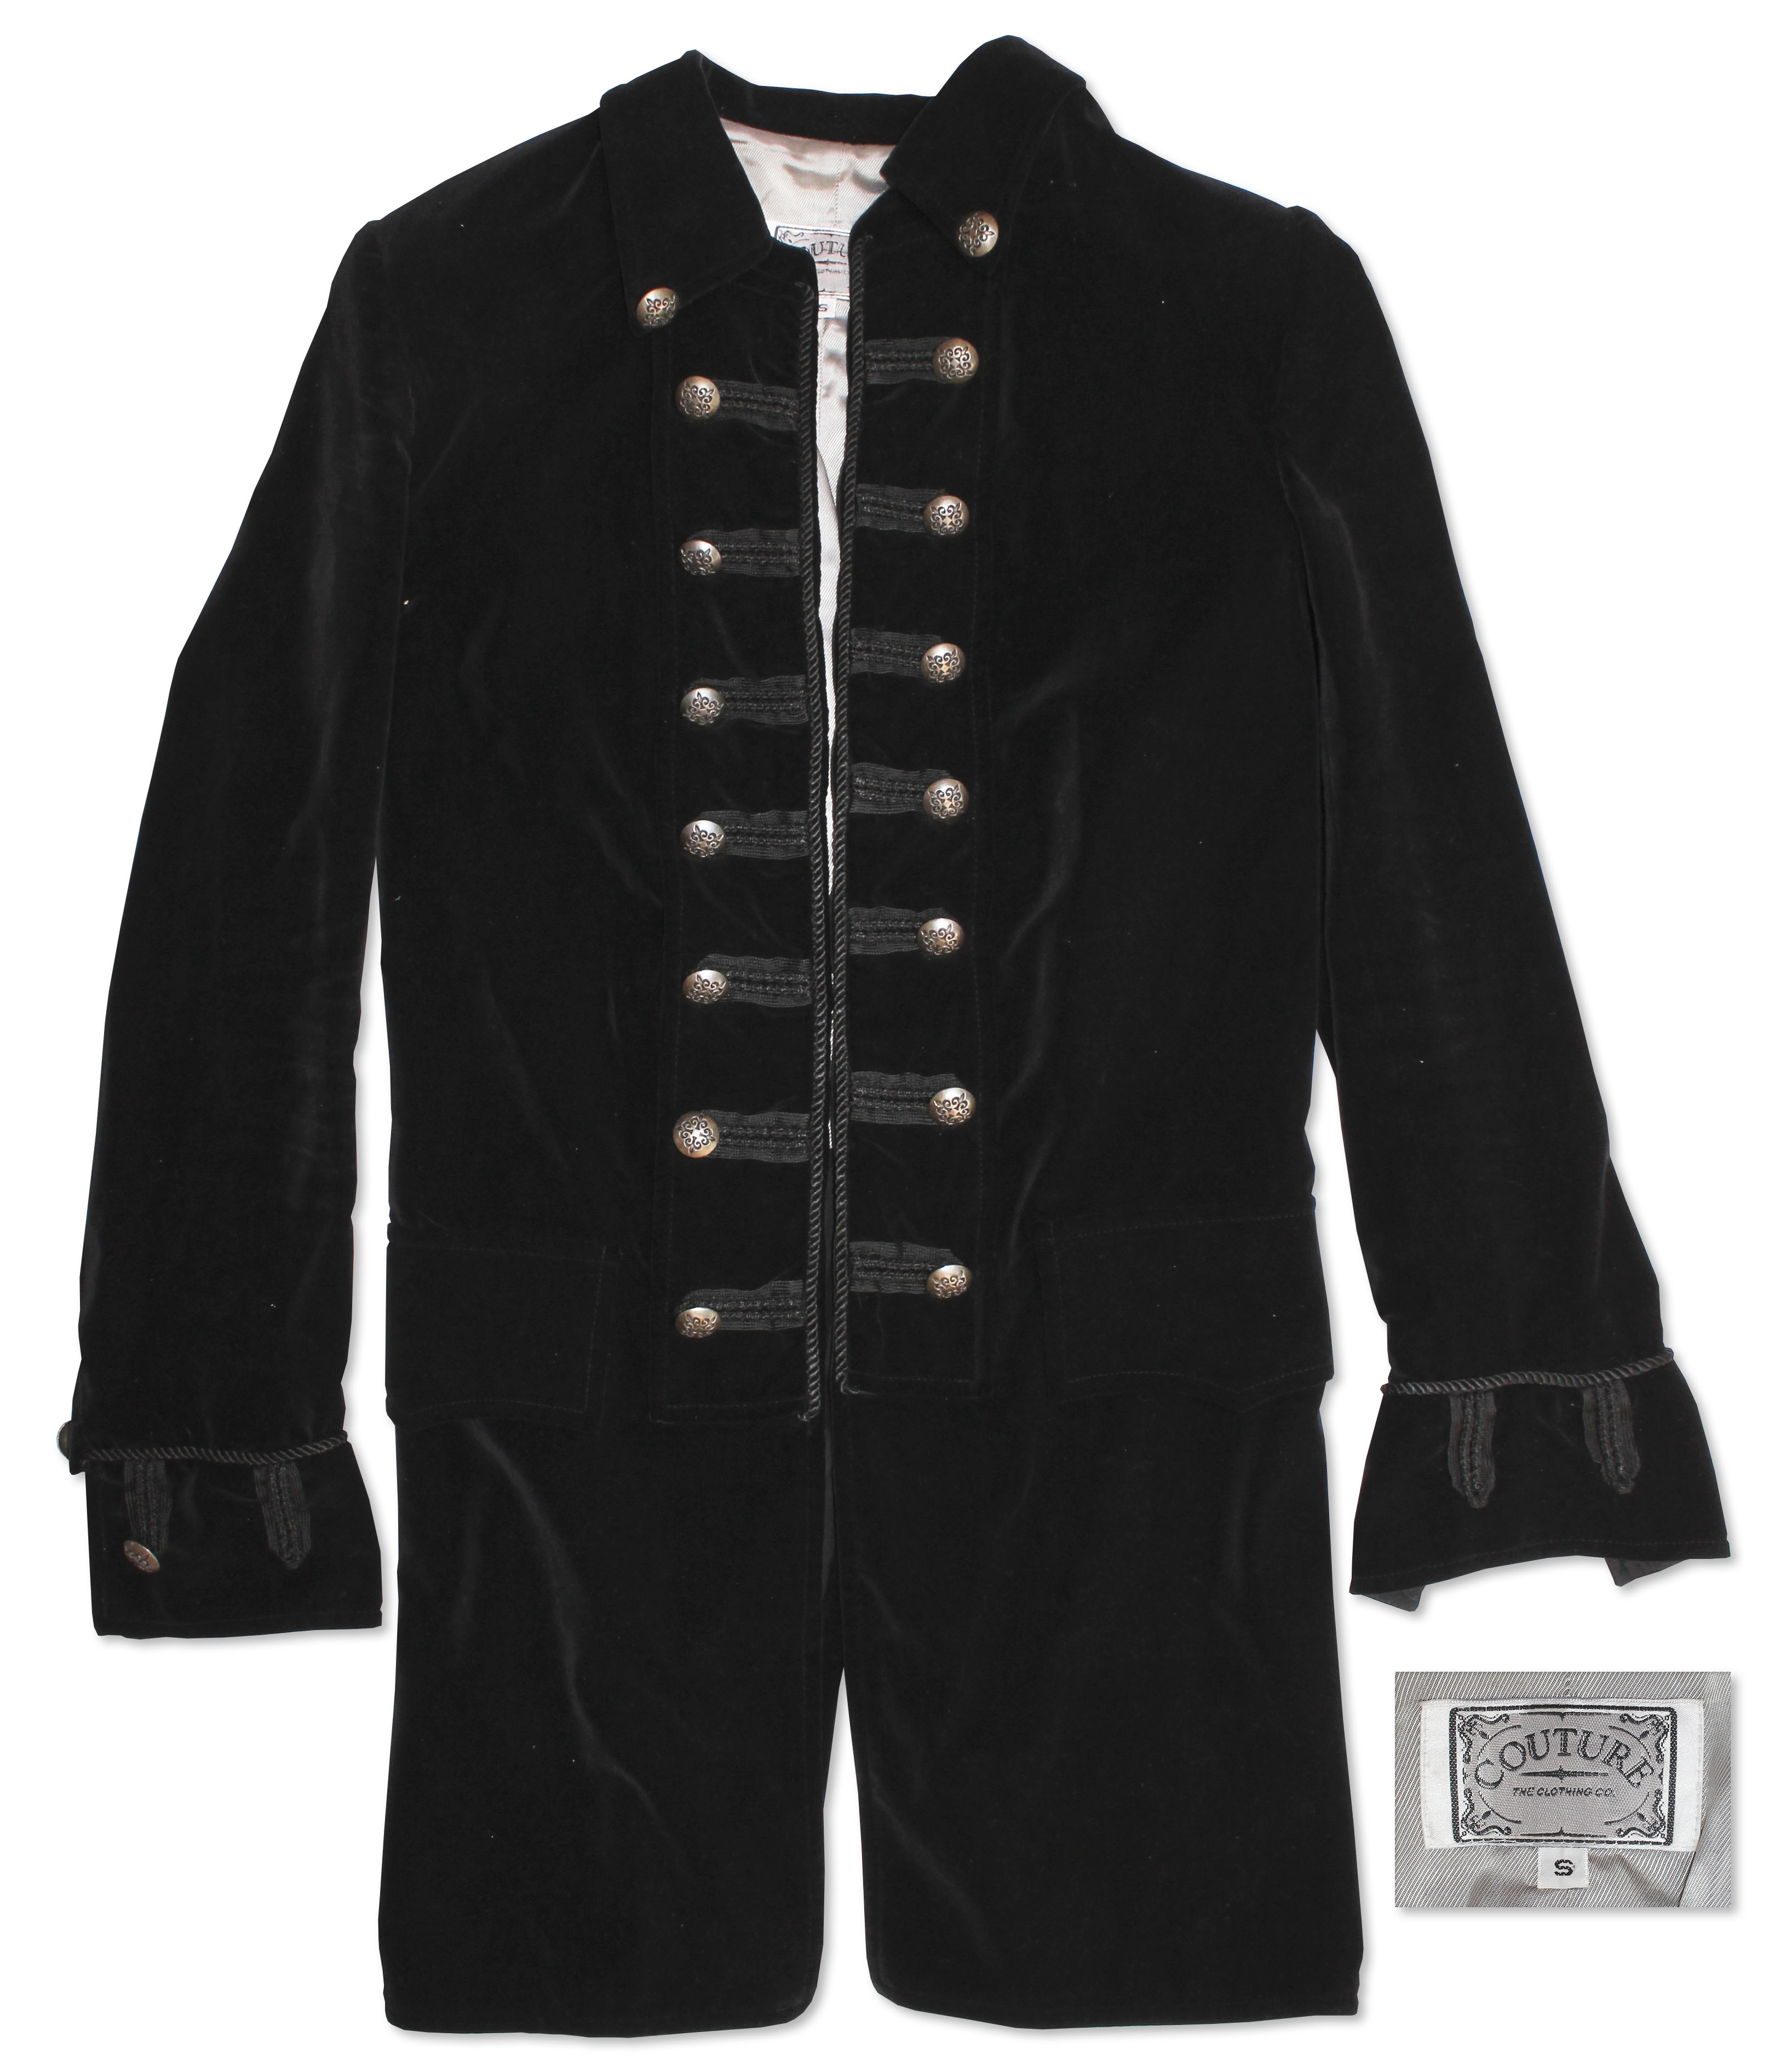 Prince Memorabilia Auction Prince Worn Velvet Military Jacket -- With LOA From Prince's Fashion Collaborator